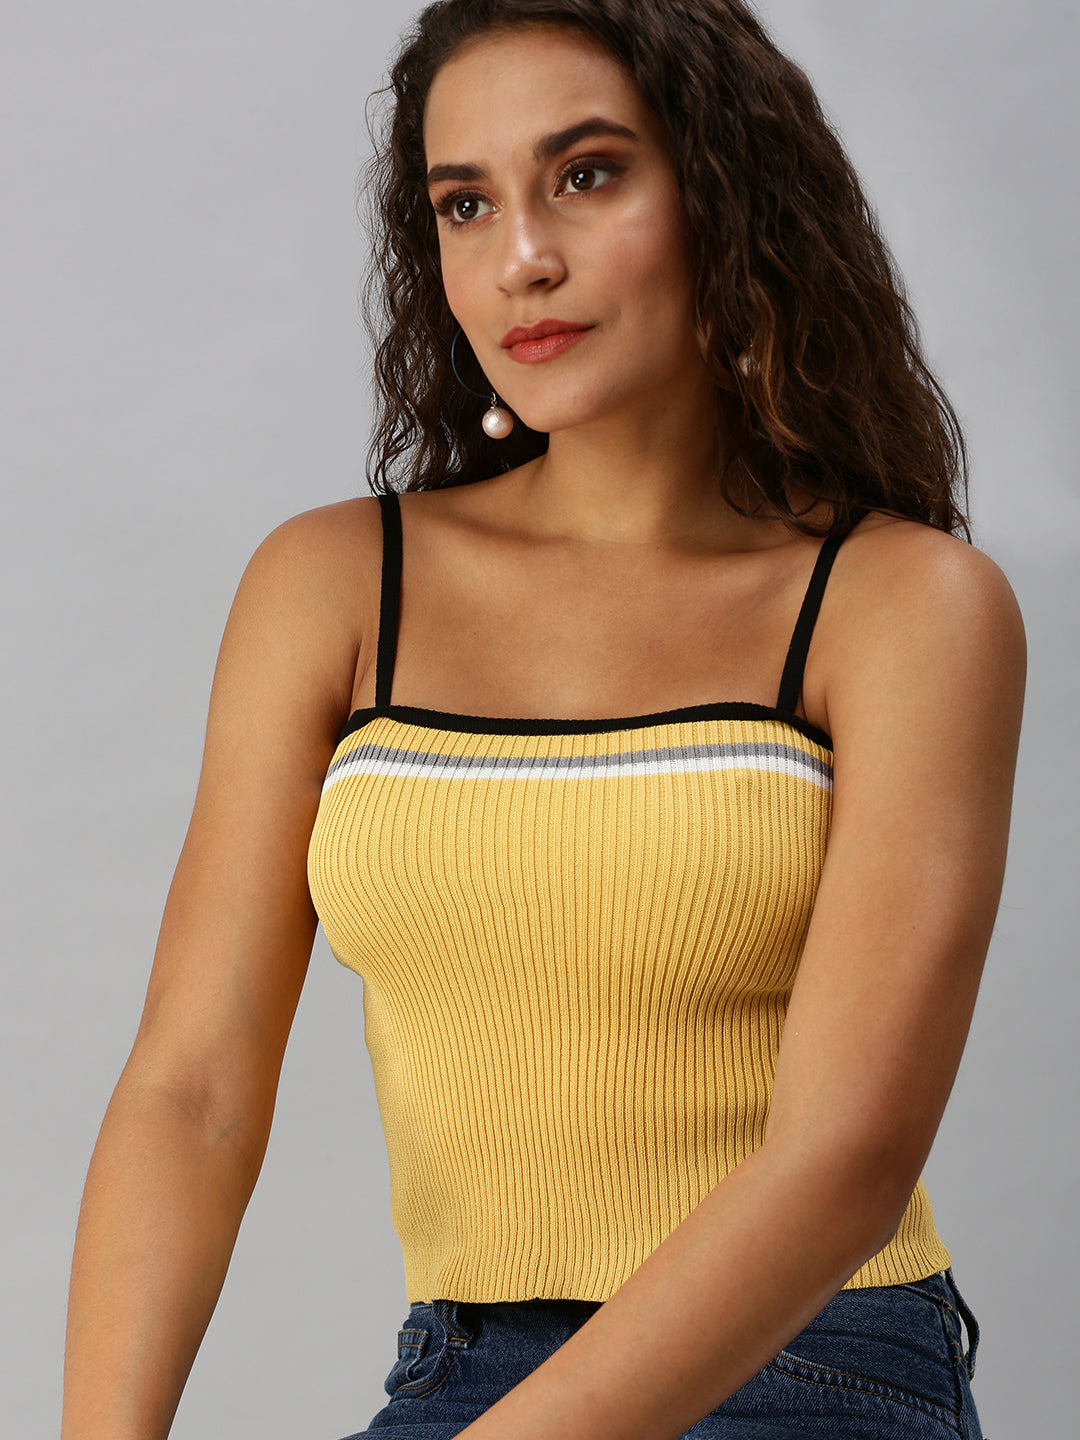 Women Shoulder Straps Solid Yellow Fitted Top